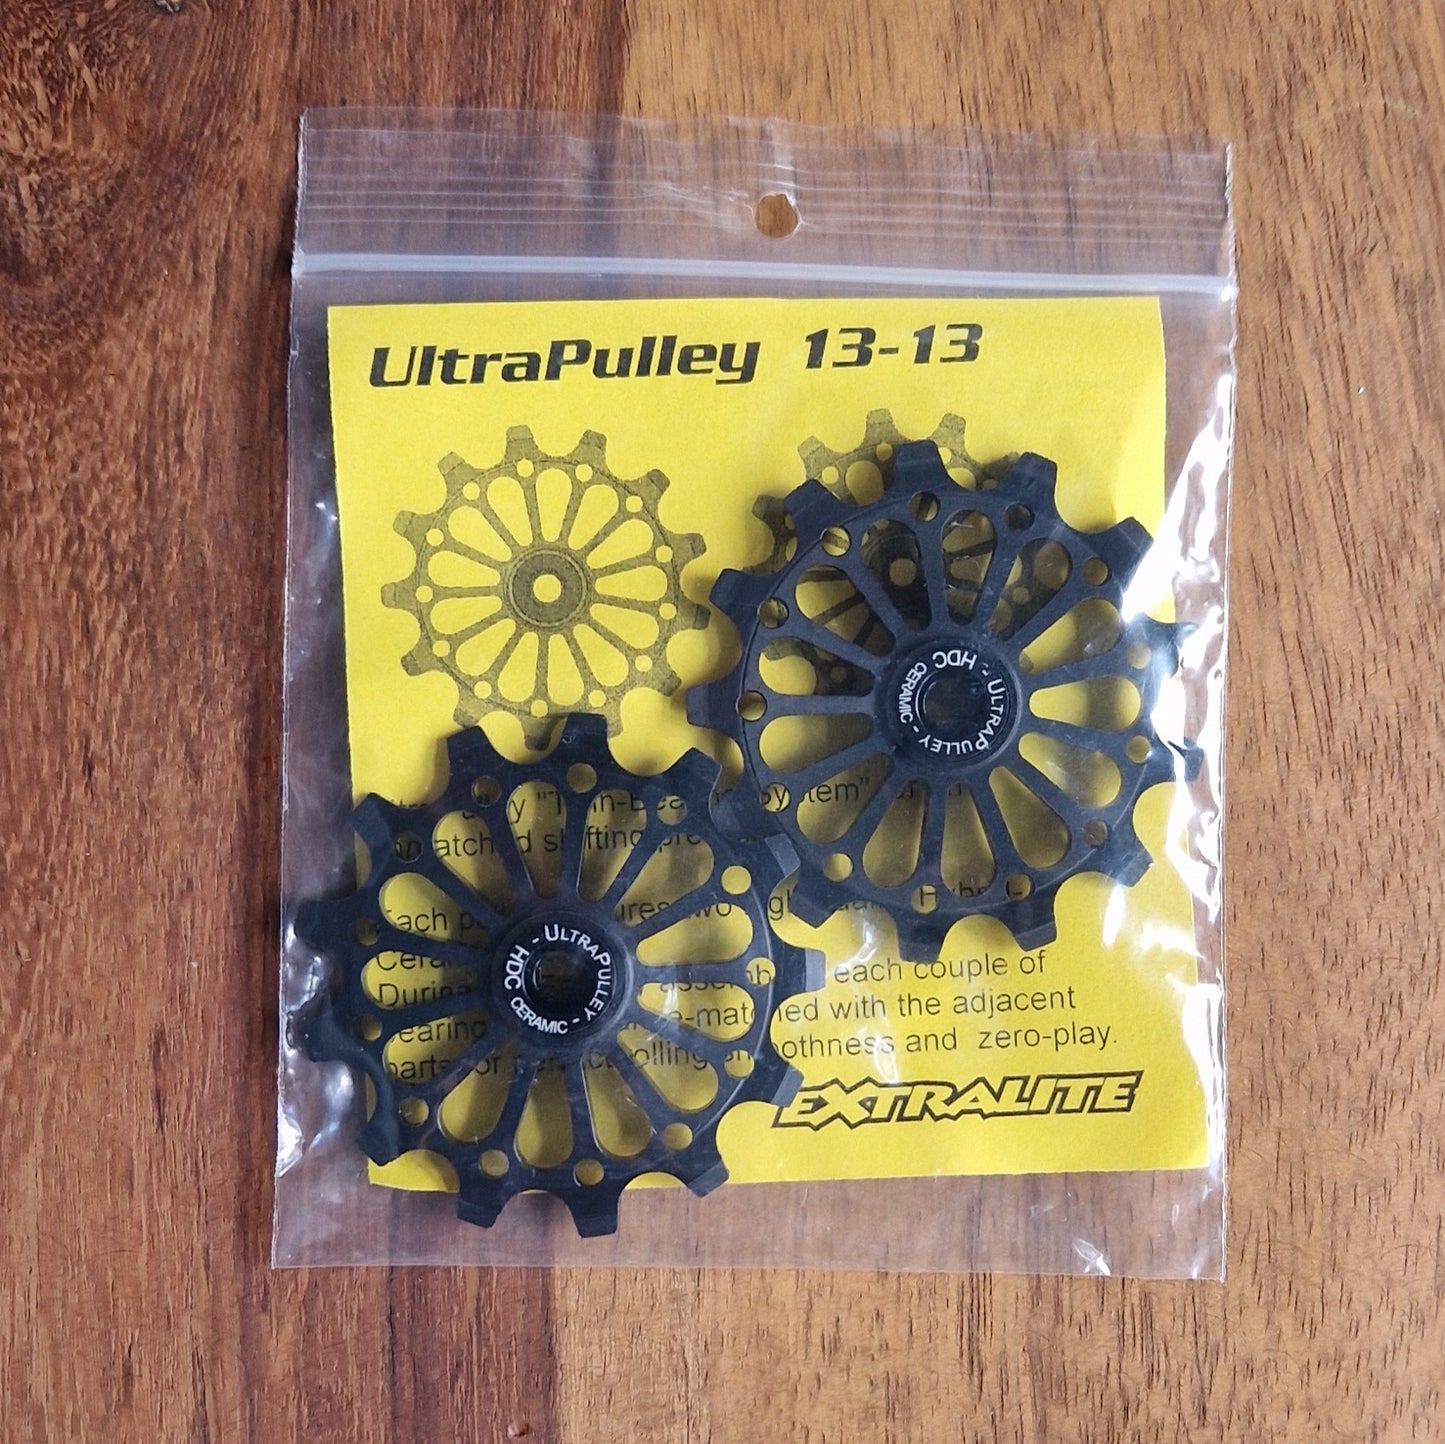 Extralite UltraPulley 13-13